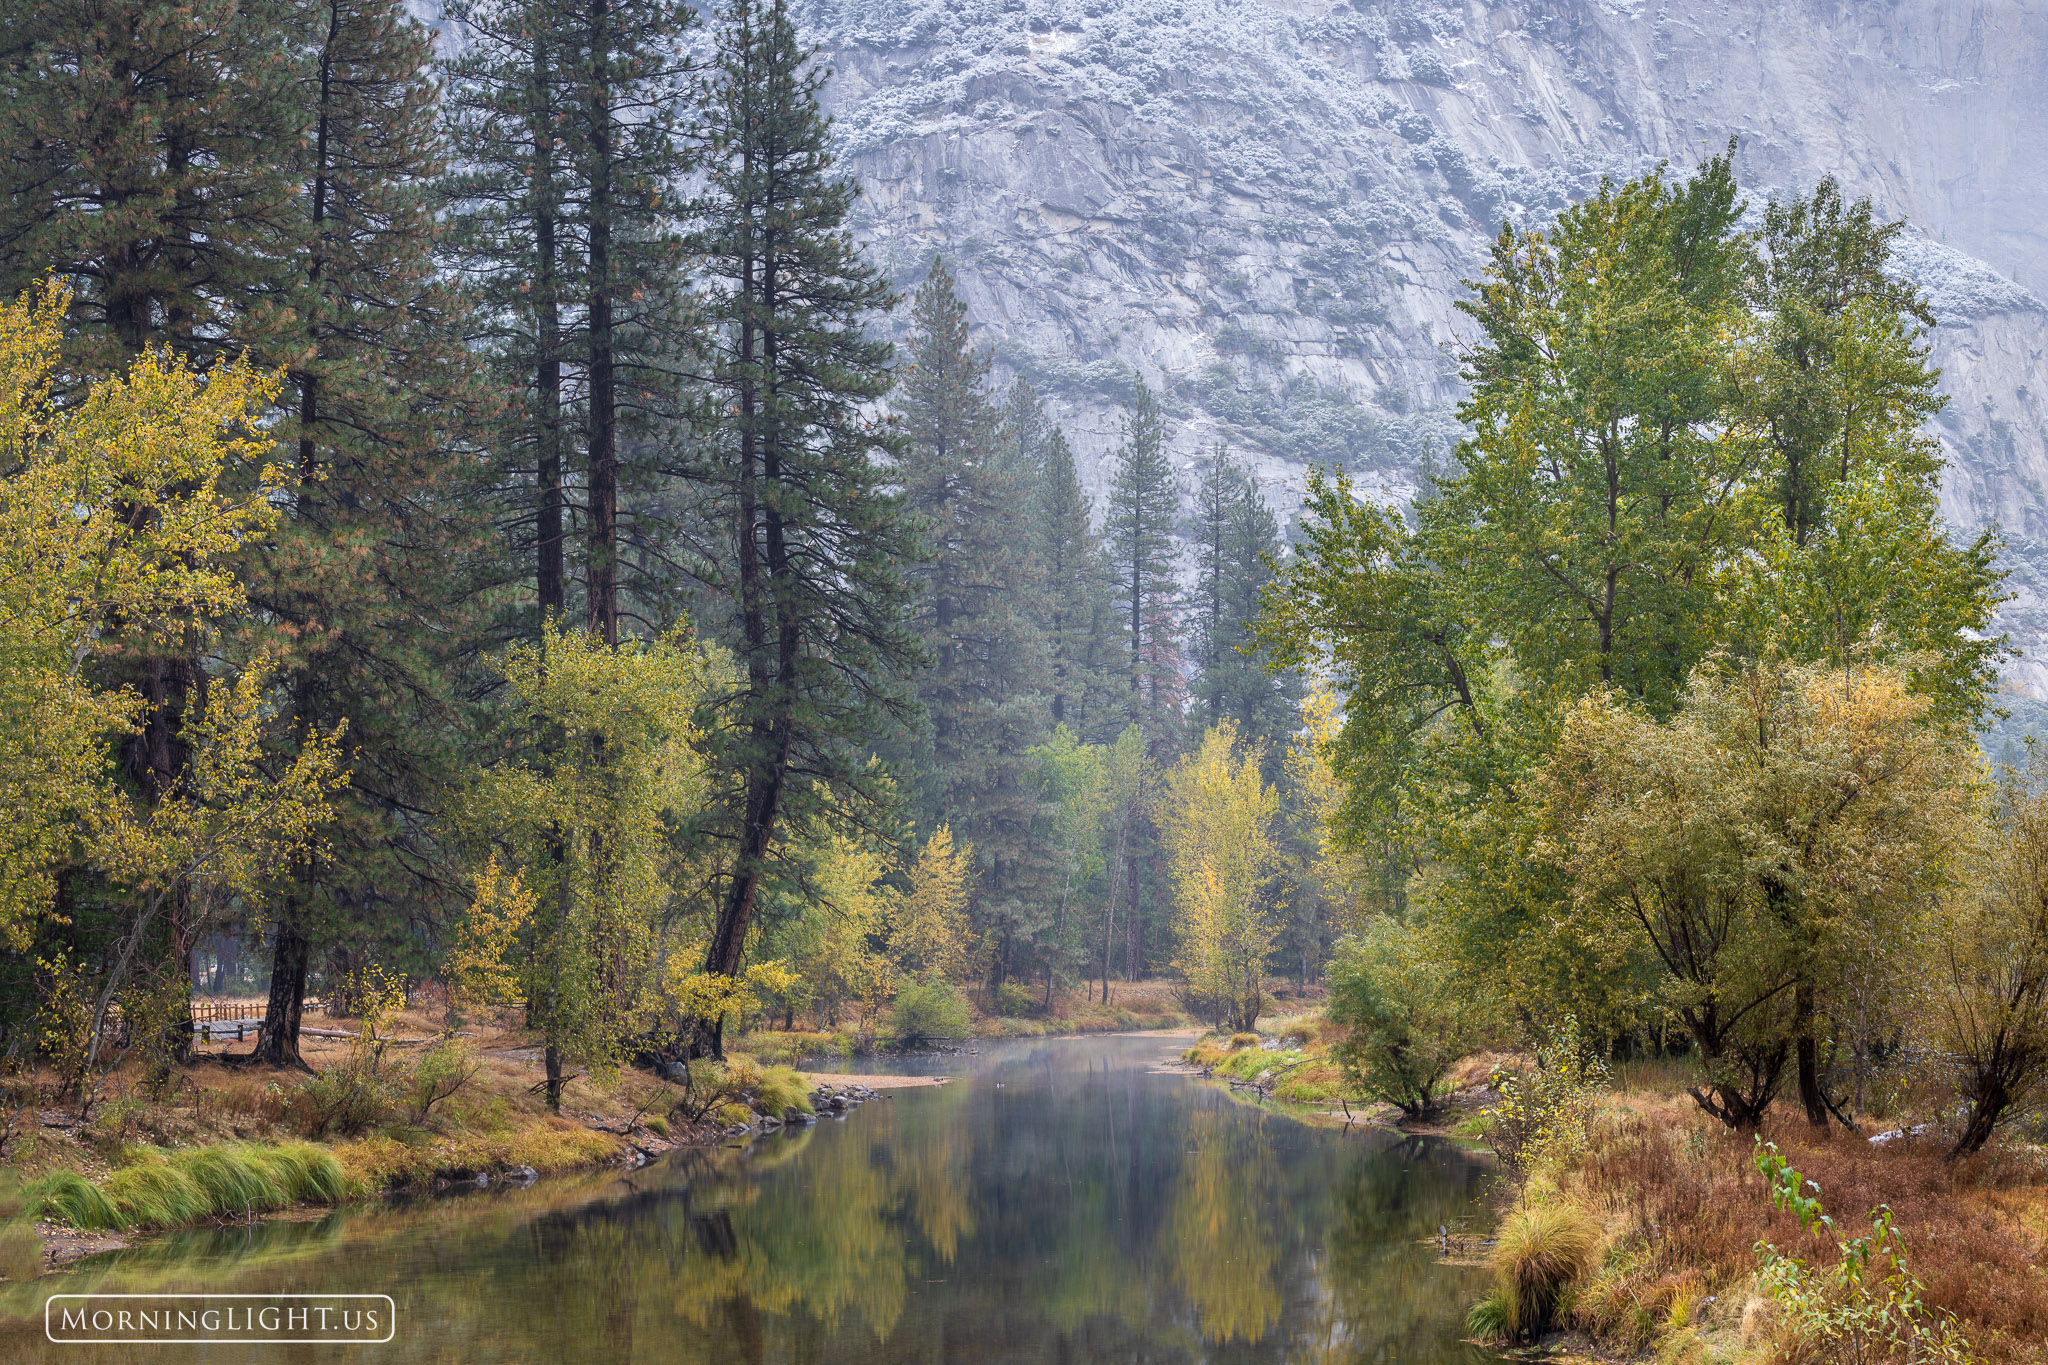 On a quiet autumn morning, the Merced River made its way through through the middle of Yosemite Valley in a world tinted with...